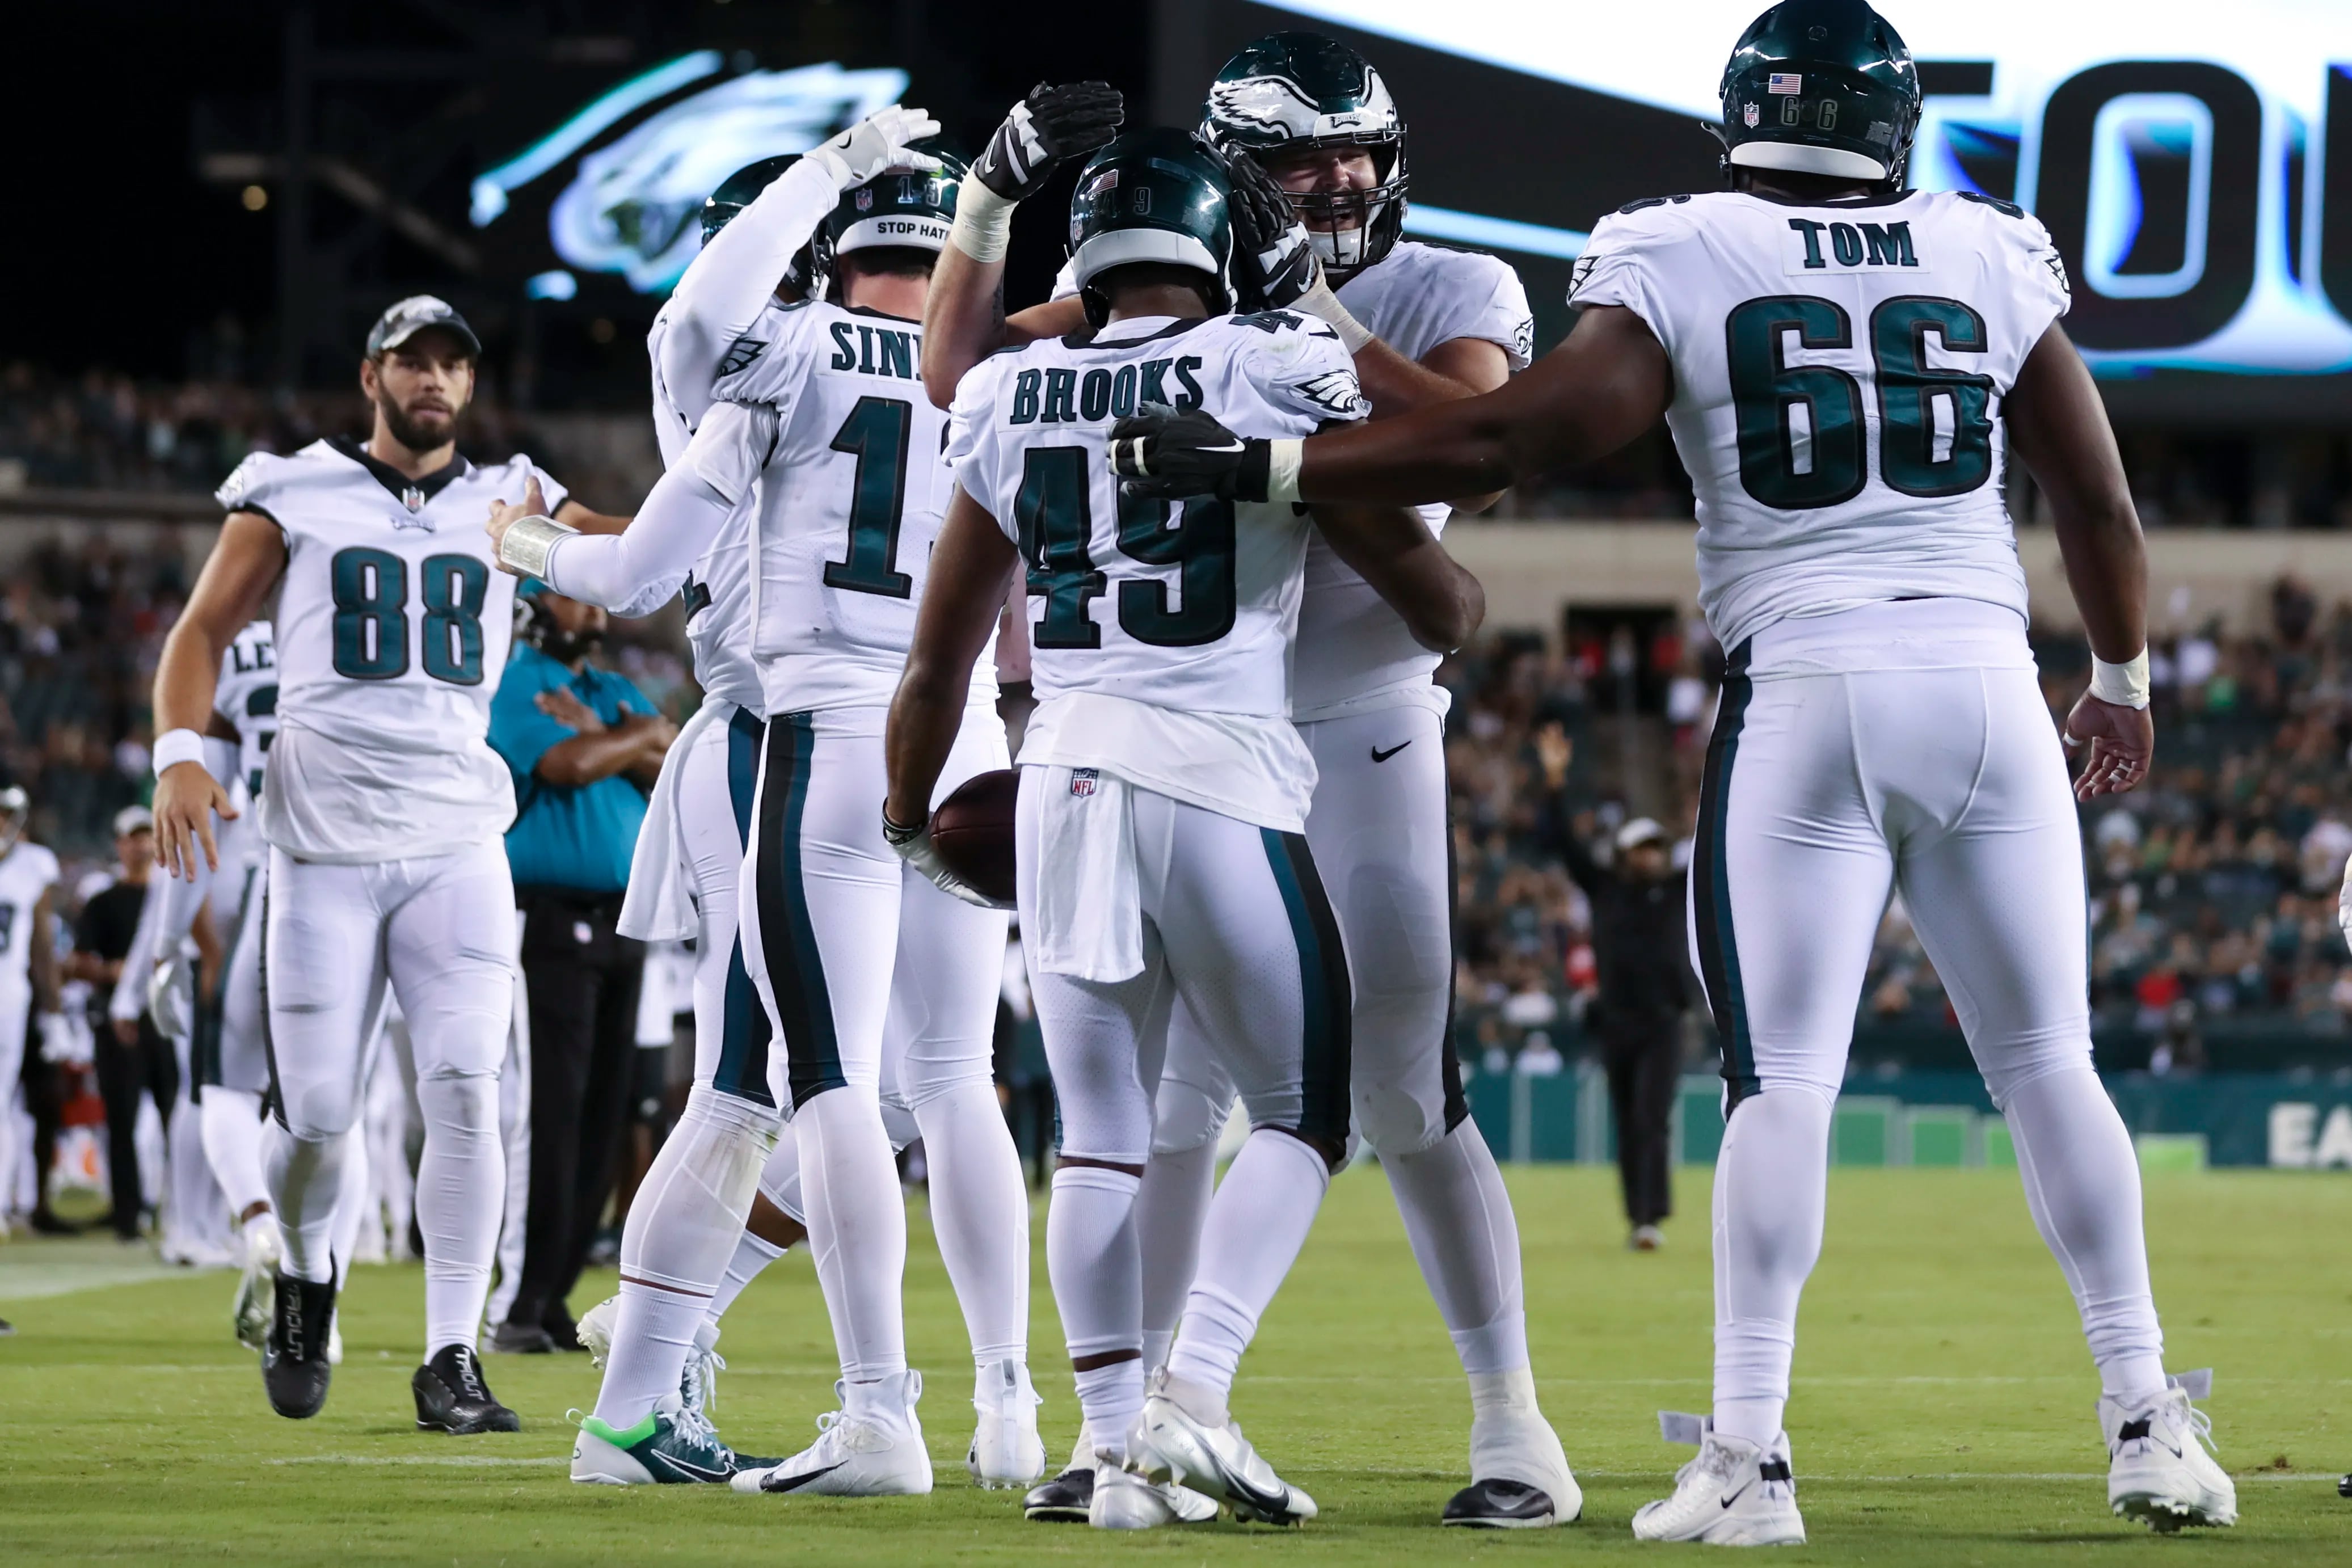 Photos of the Eagles' 24-21 preseason loss to the Jets